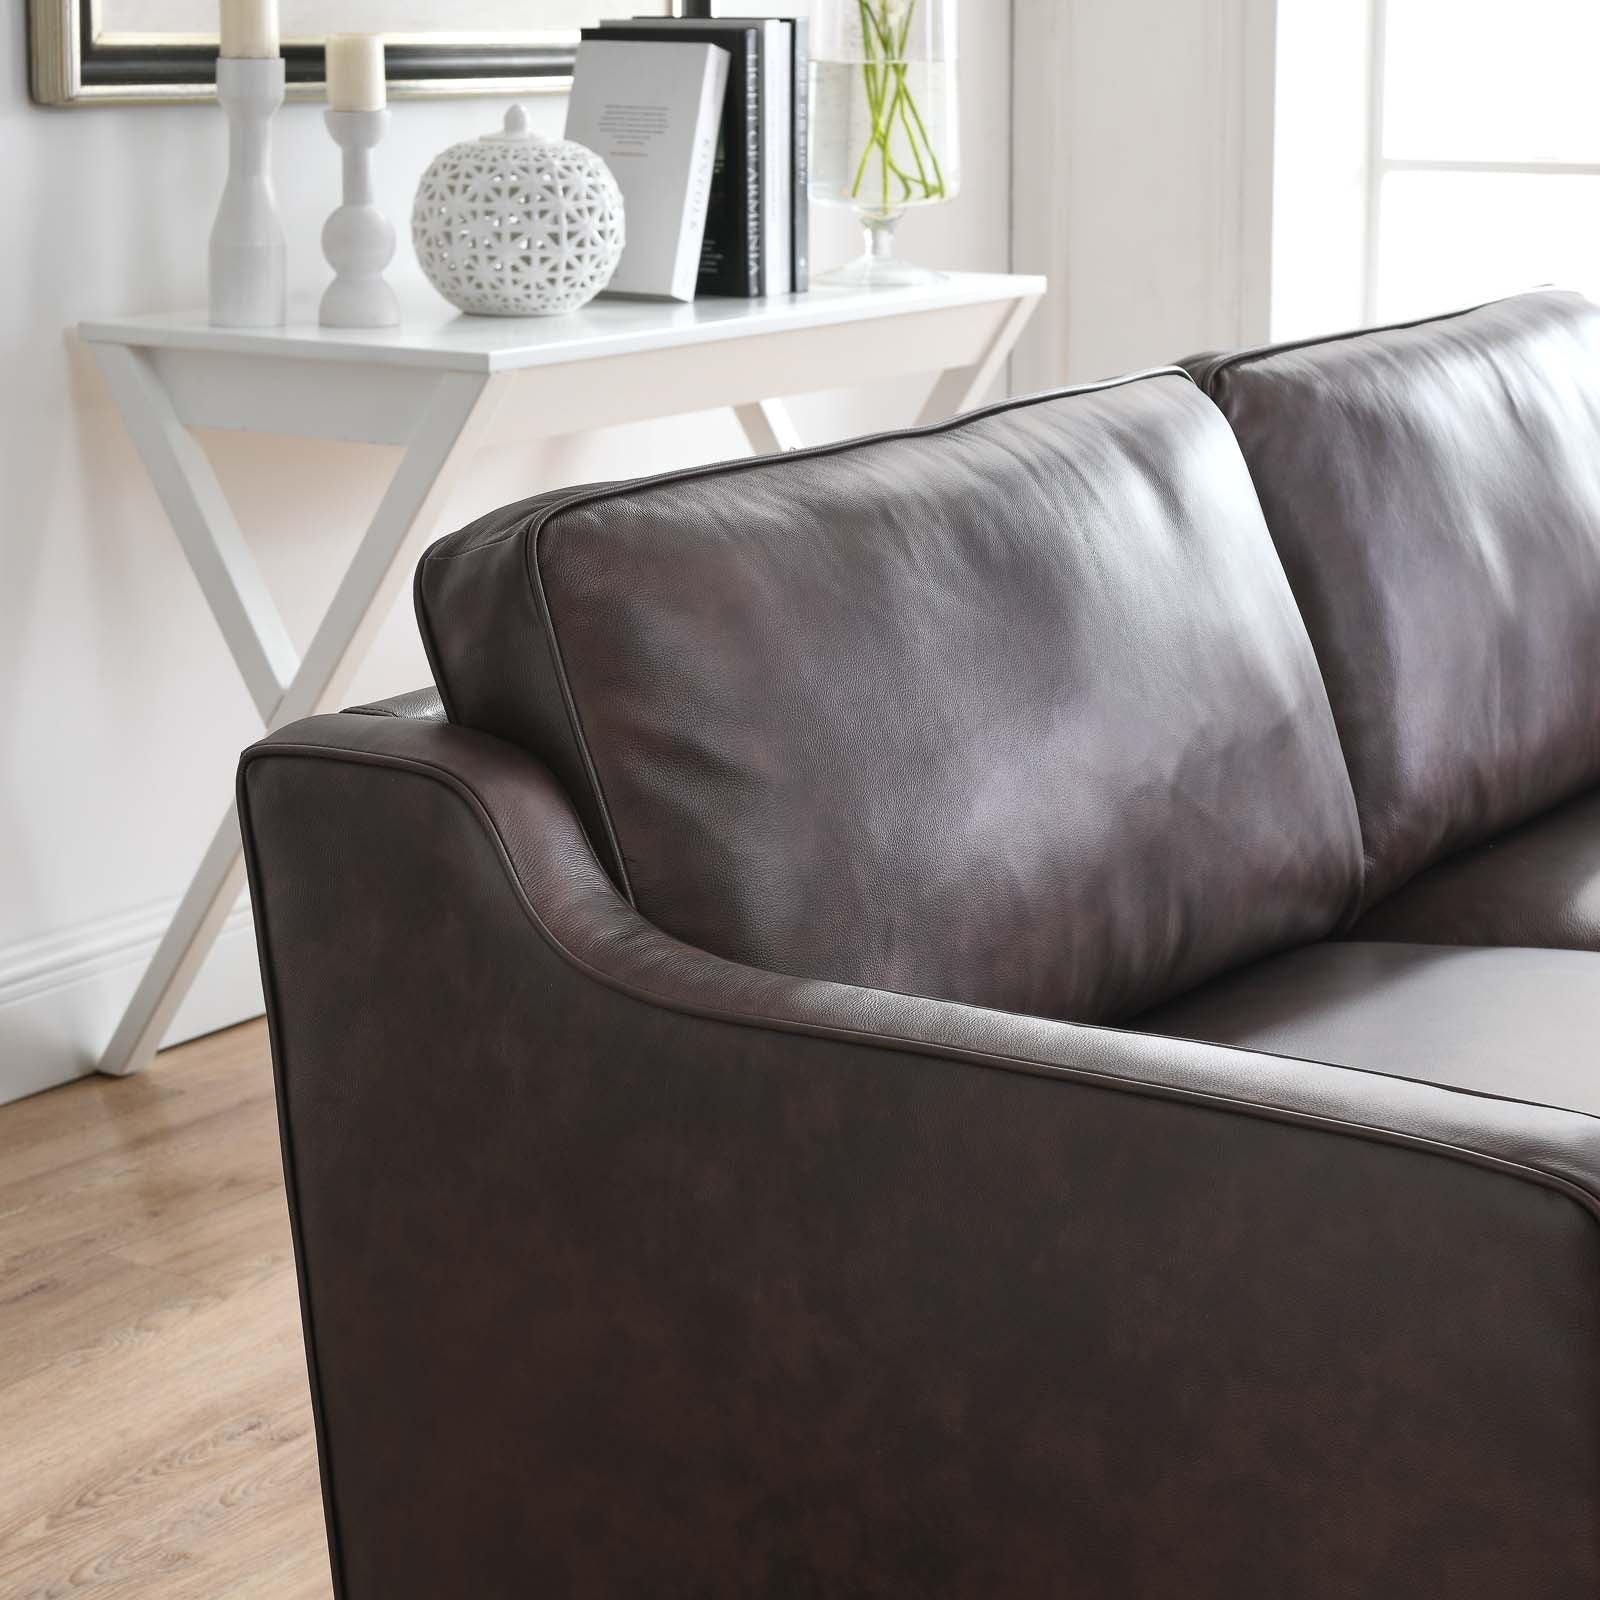 Modway Sofas & Couches - Impart Genuine Leather Sofa Brown